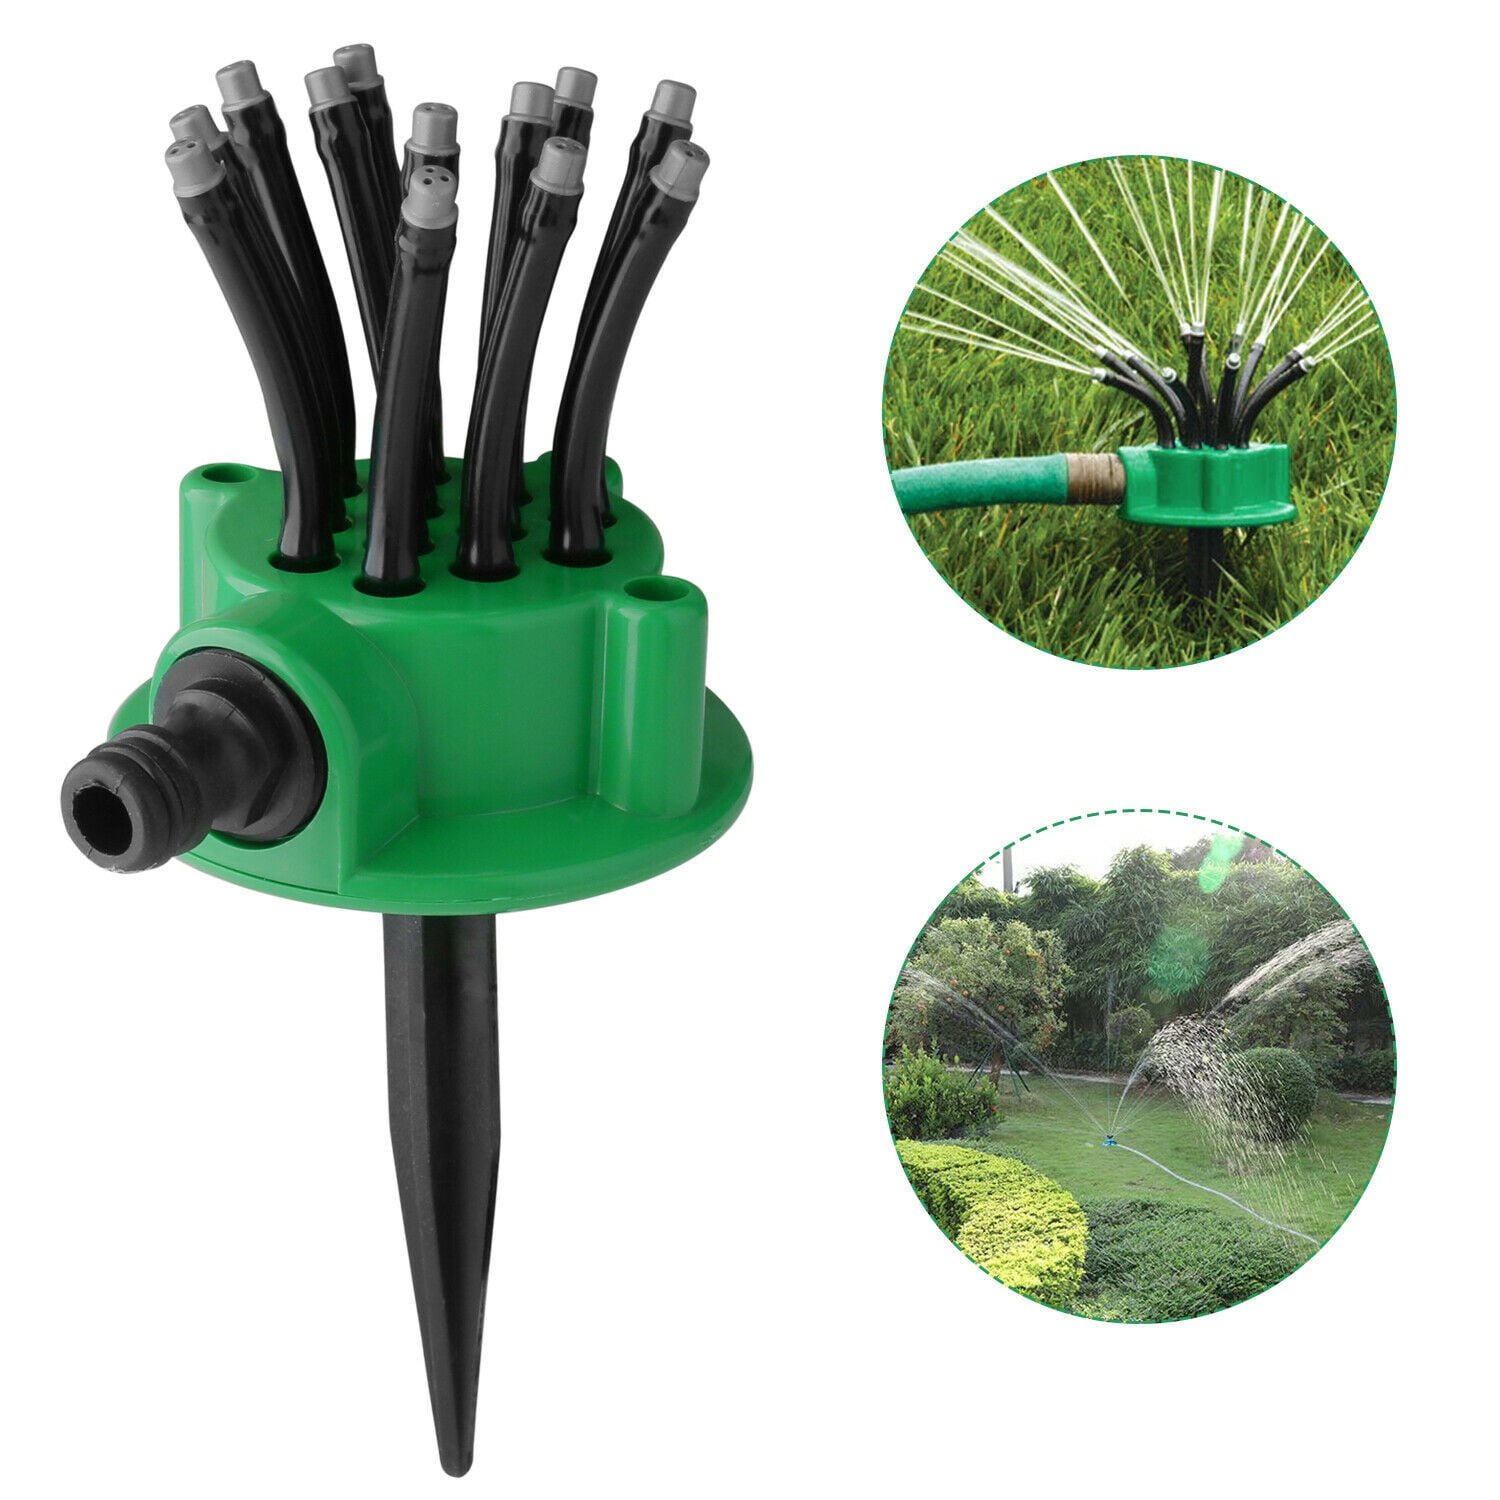 Sprinkler Automatic Spray Head 360 Degree In Ground Lawn Yard Irrigation Nozzle 